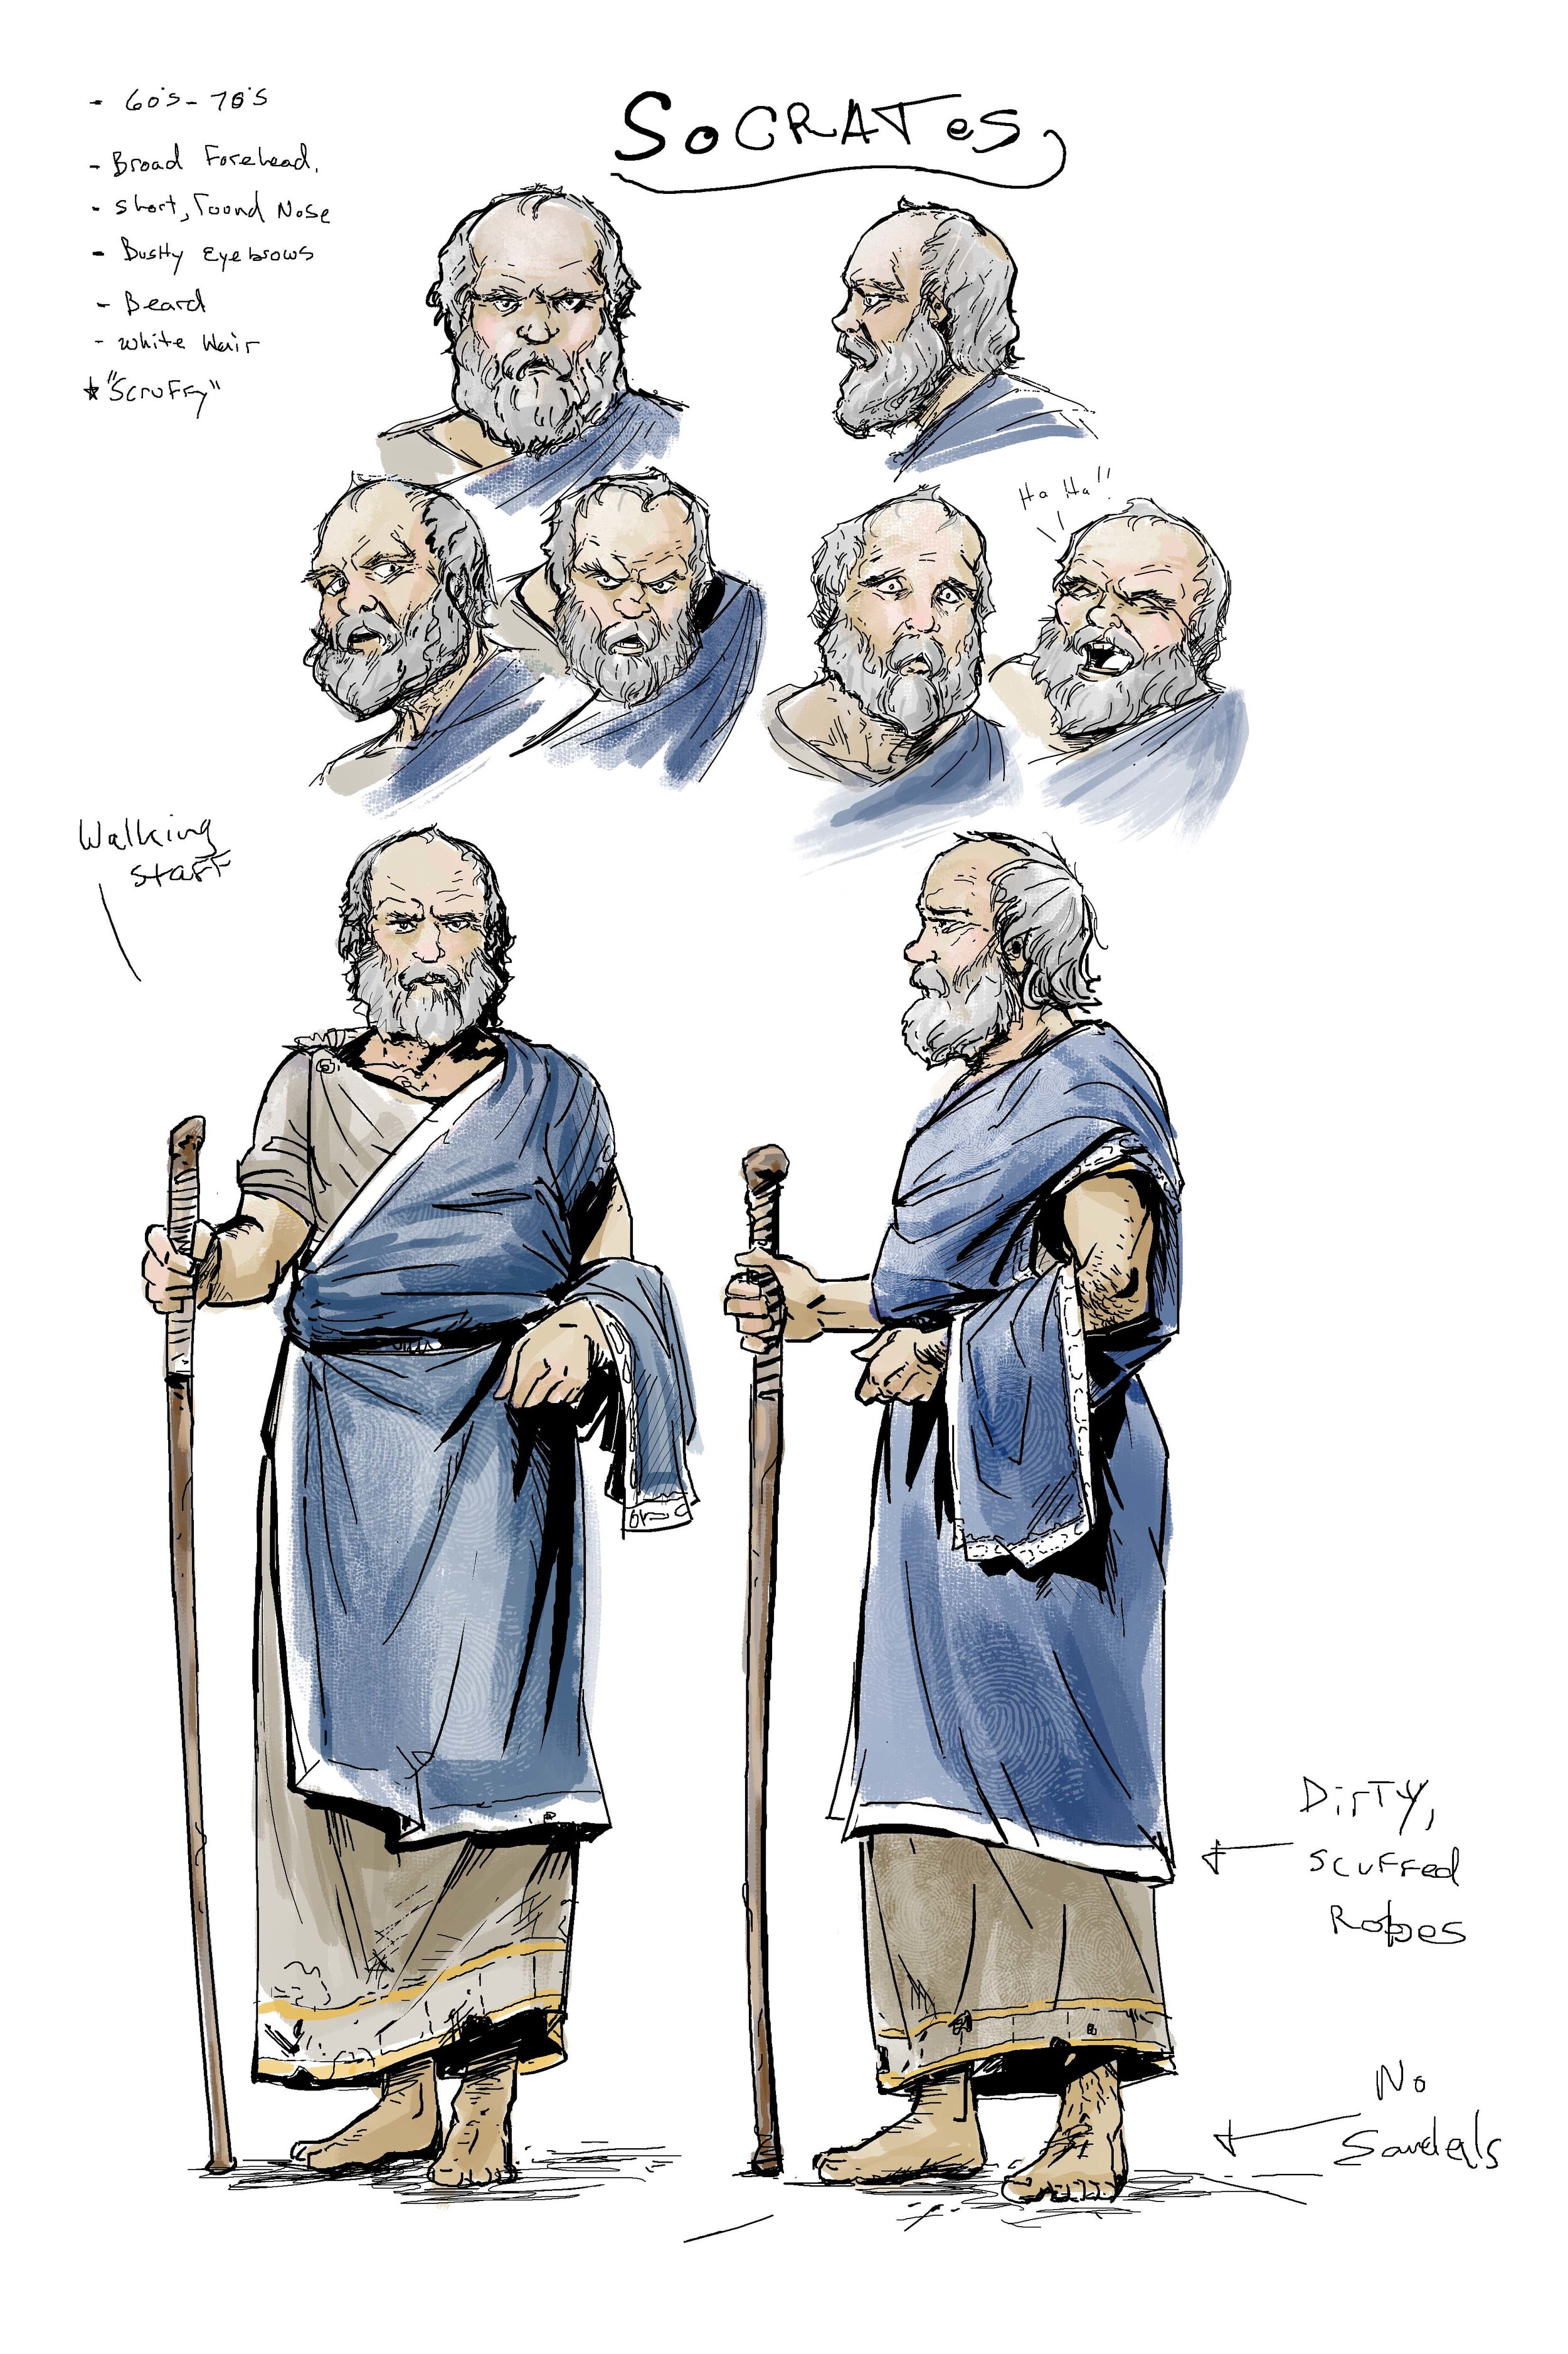 Socrates Vector Clip Art Illustrations. 106 Socrates clipart EPS vector  drawings available to search from thousands of royalty free illustration  providers.